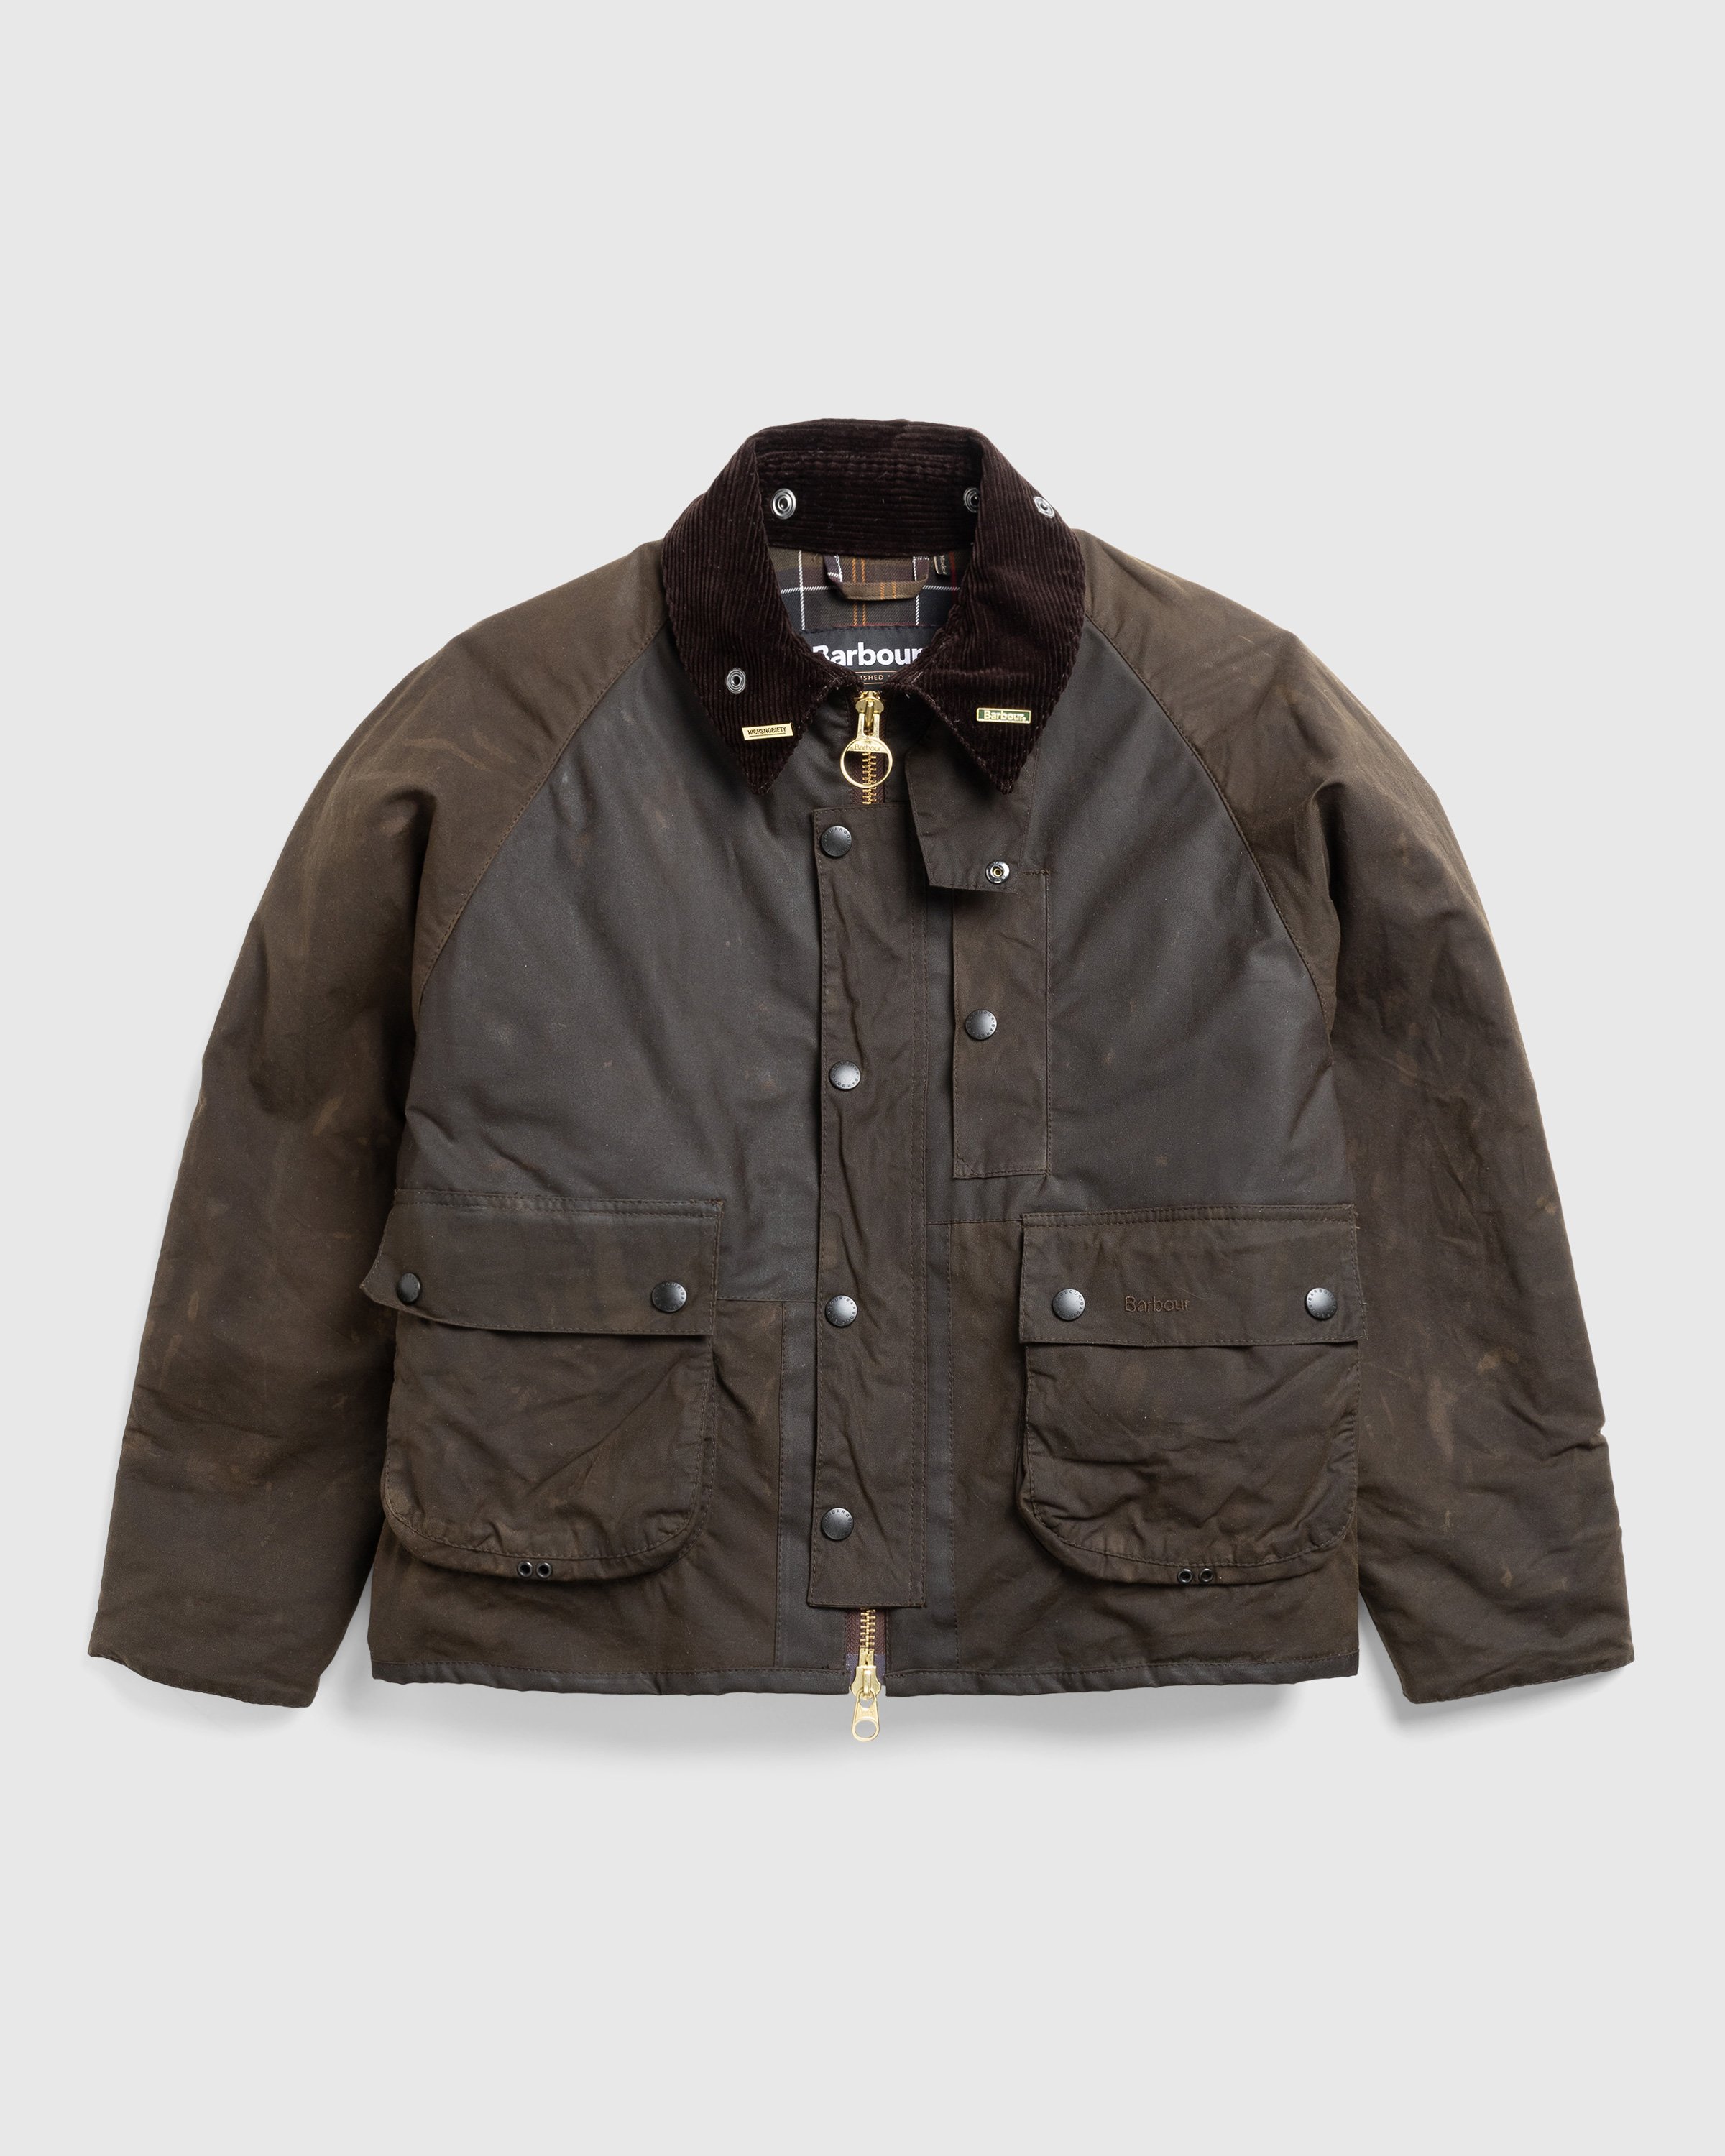 Barbour x Highsnobiety – Re-Loved Bedale Jacket Size 42 (L) Brown